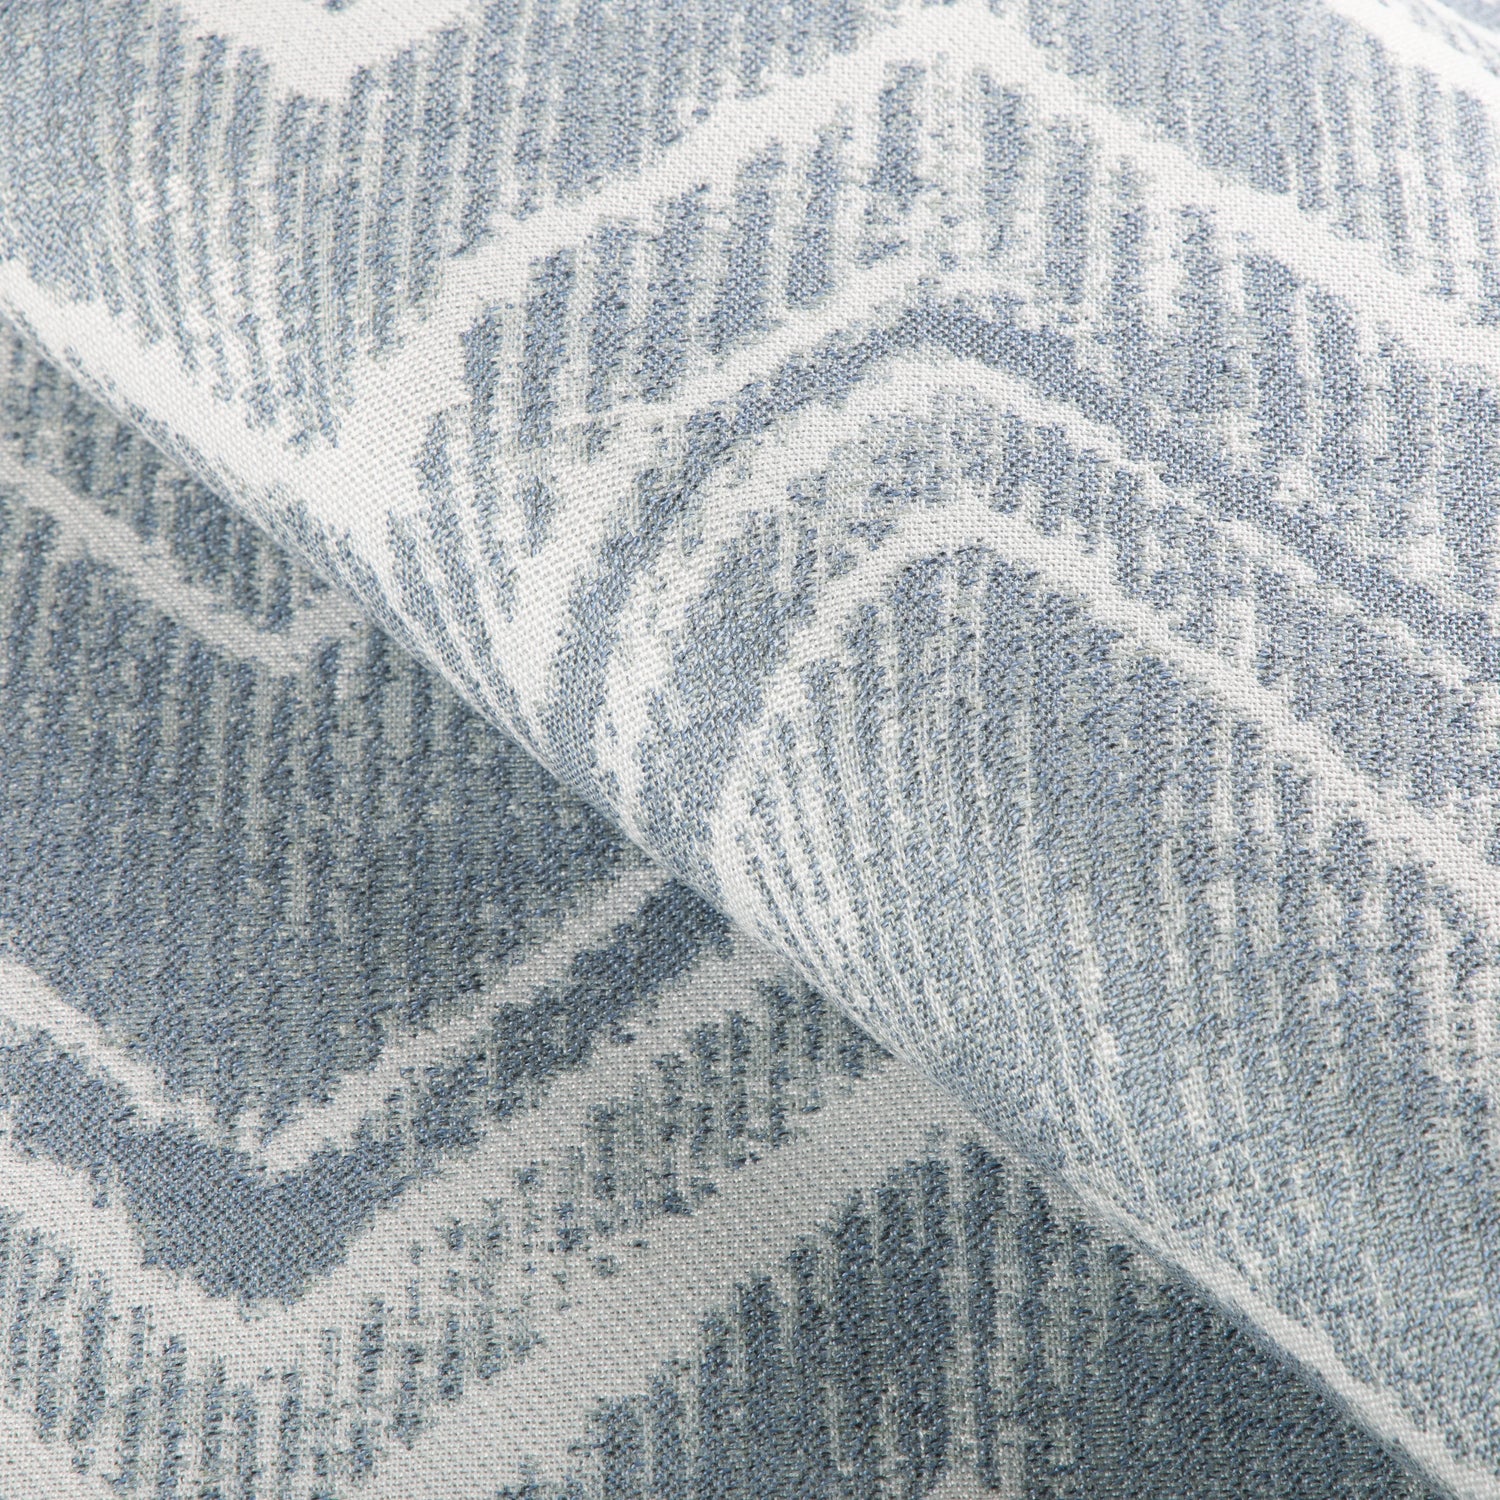 Alternate view of Riviera Batik fabric in ocean color - pattern 36934.15.0 - by Kravet Couture in the Riviera collection